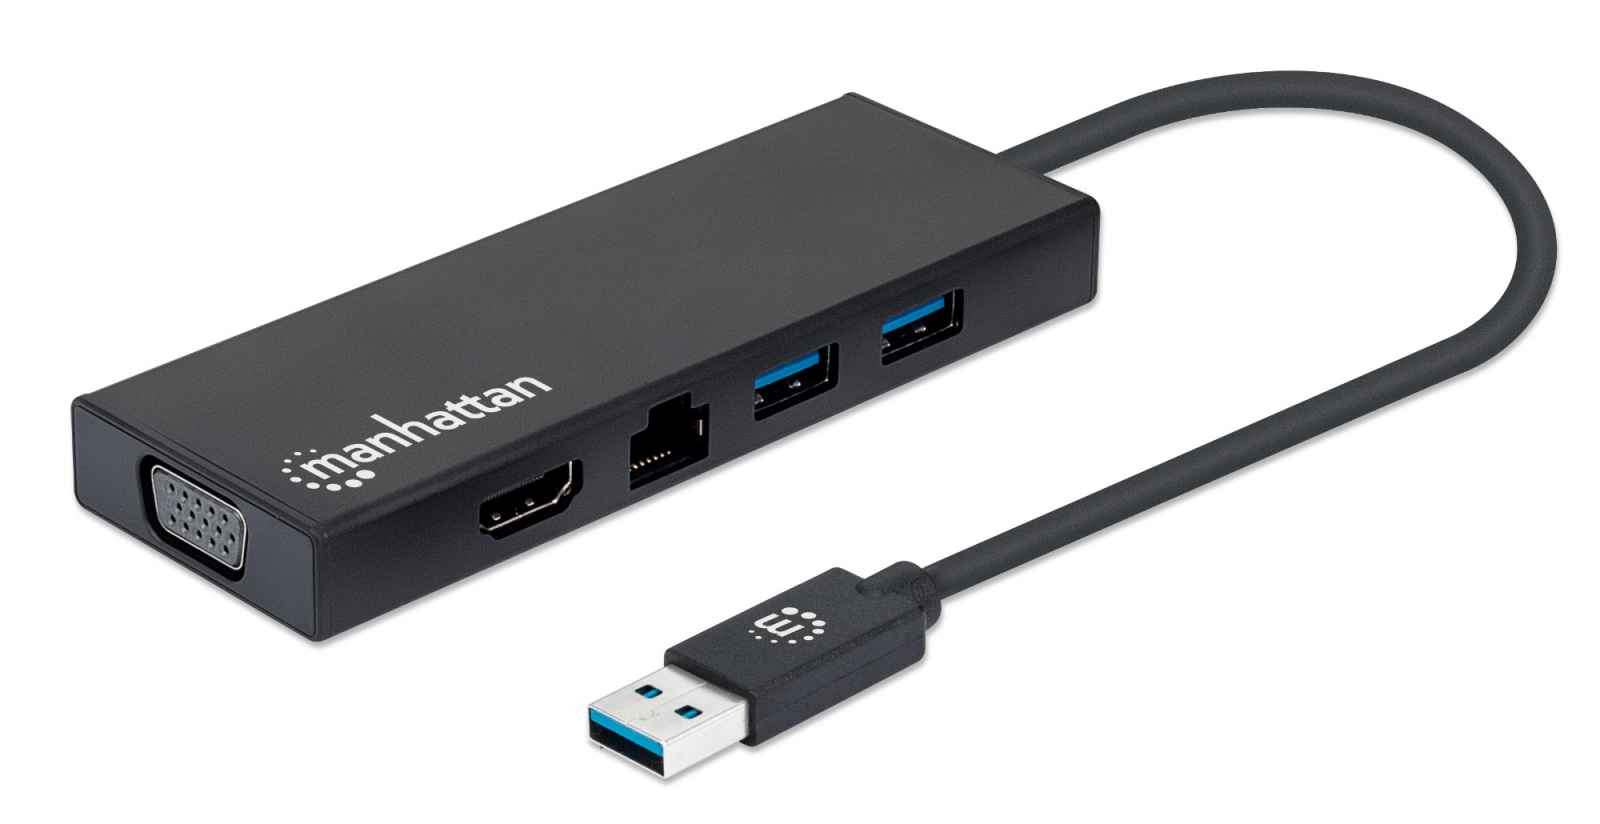 Manhattan USB-A 4-Port Hub/Dock/Converter, USB-A to HDMI, VGA, 2x USB-A and Ethernet, HDMI: 4k@60Hz, USB-A: 5 Gbps, VGA: 2048x1152@60Hz, Gigabit, Micro-USB Power Input Port (Optional, only when additional power needed. Not required for dual monitor functi